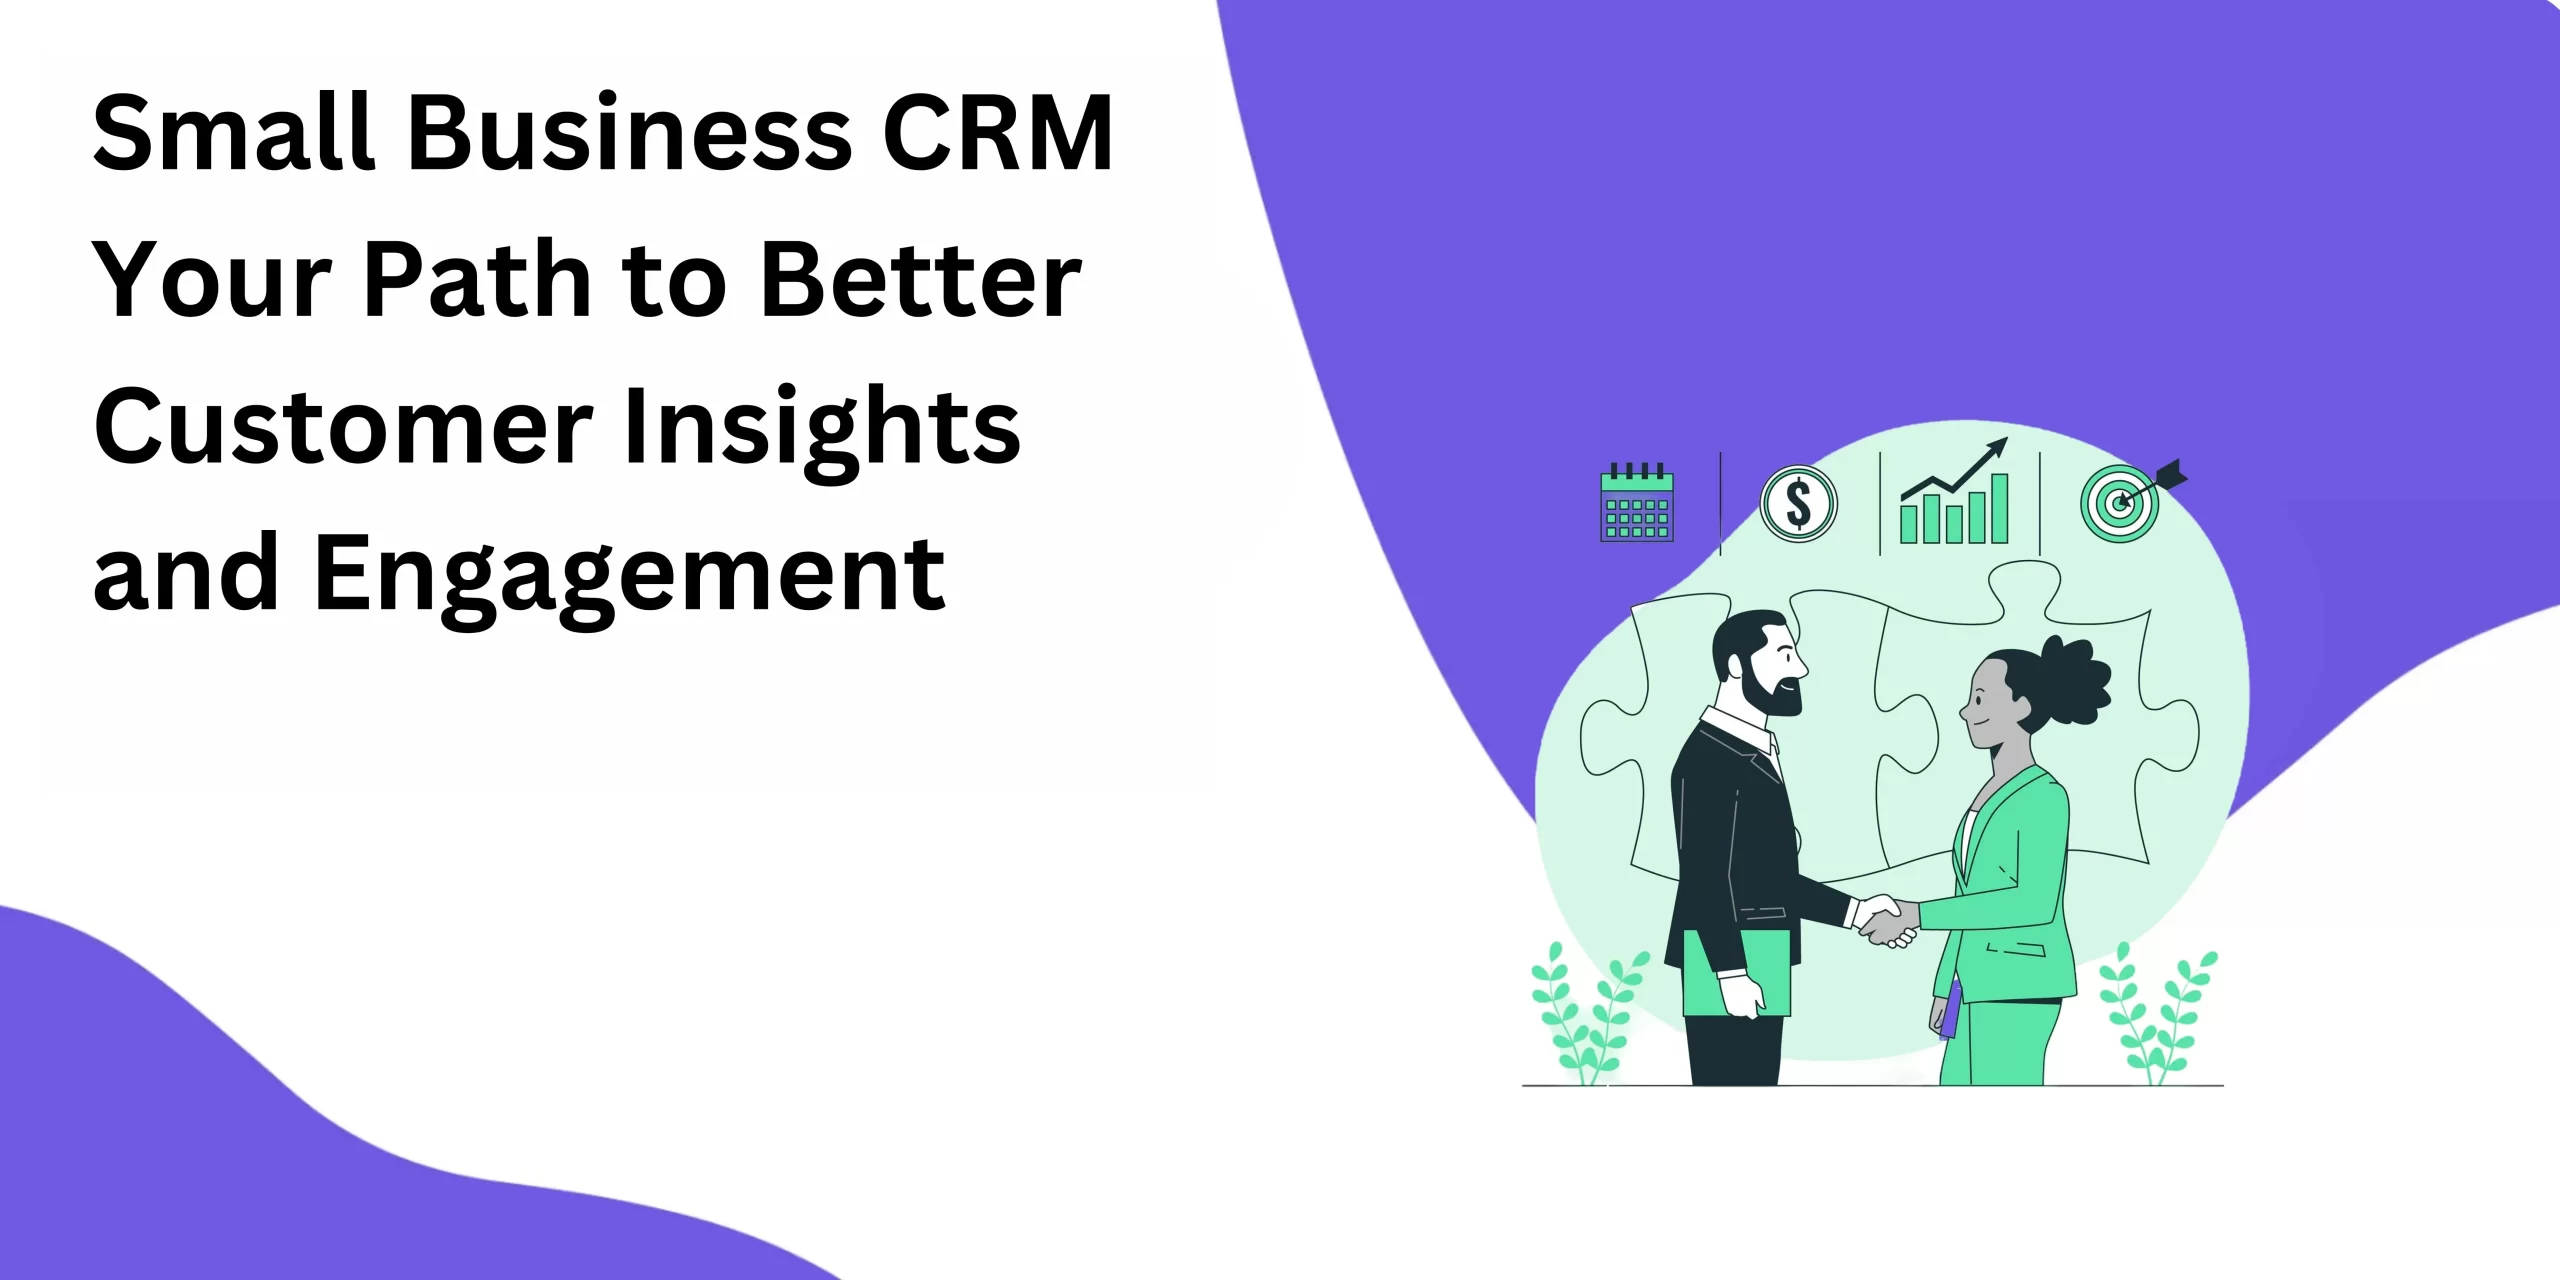 Small Business CRM Your Path to Better Customer Insights and Engagement